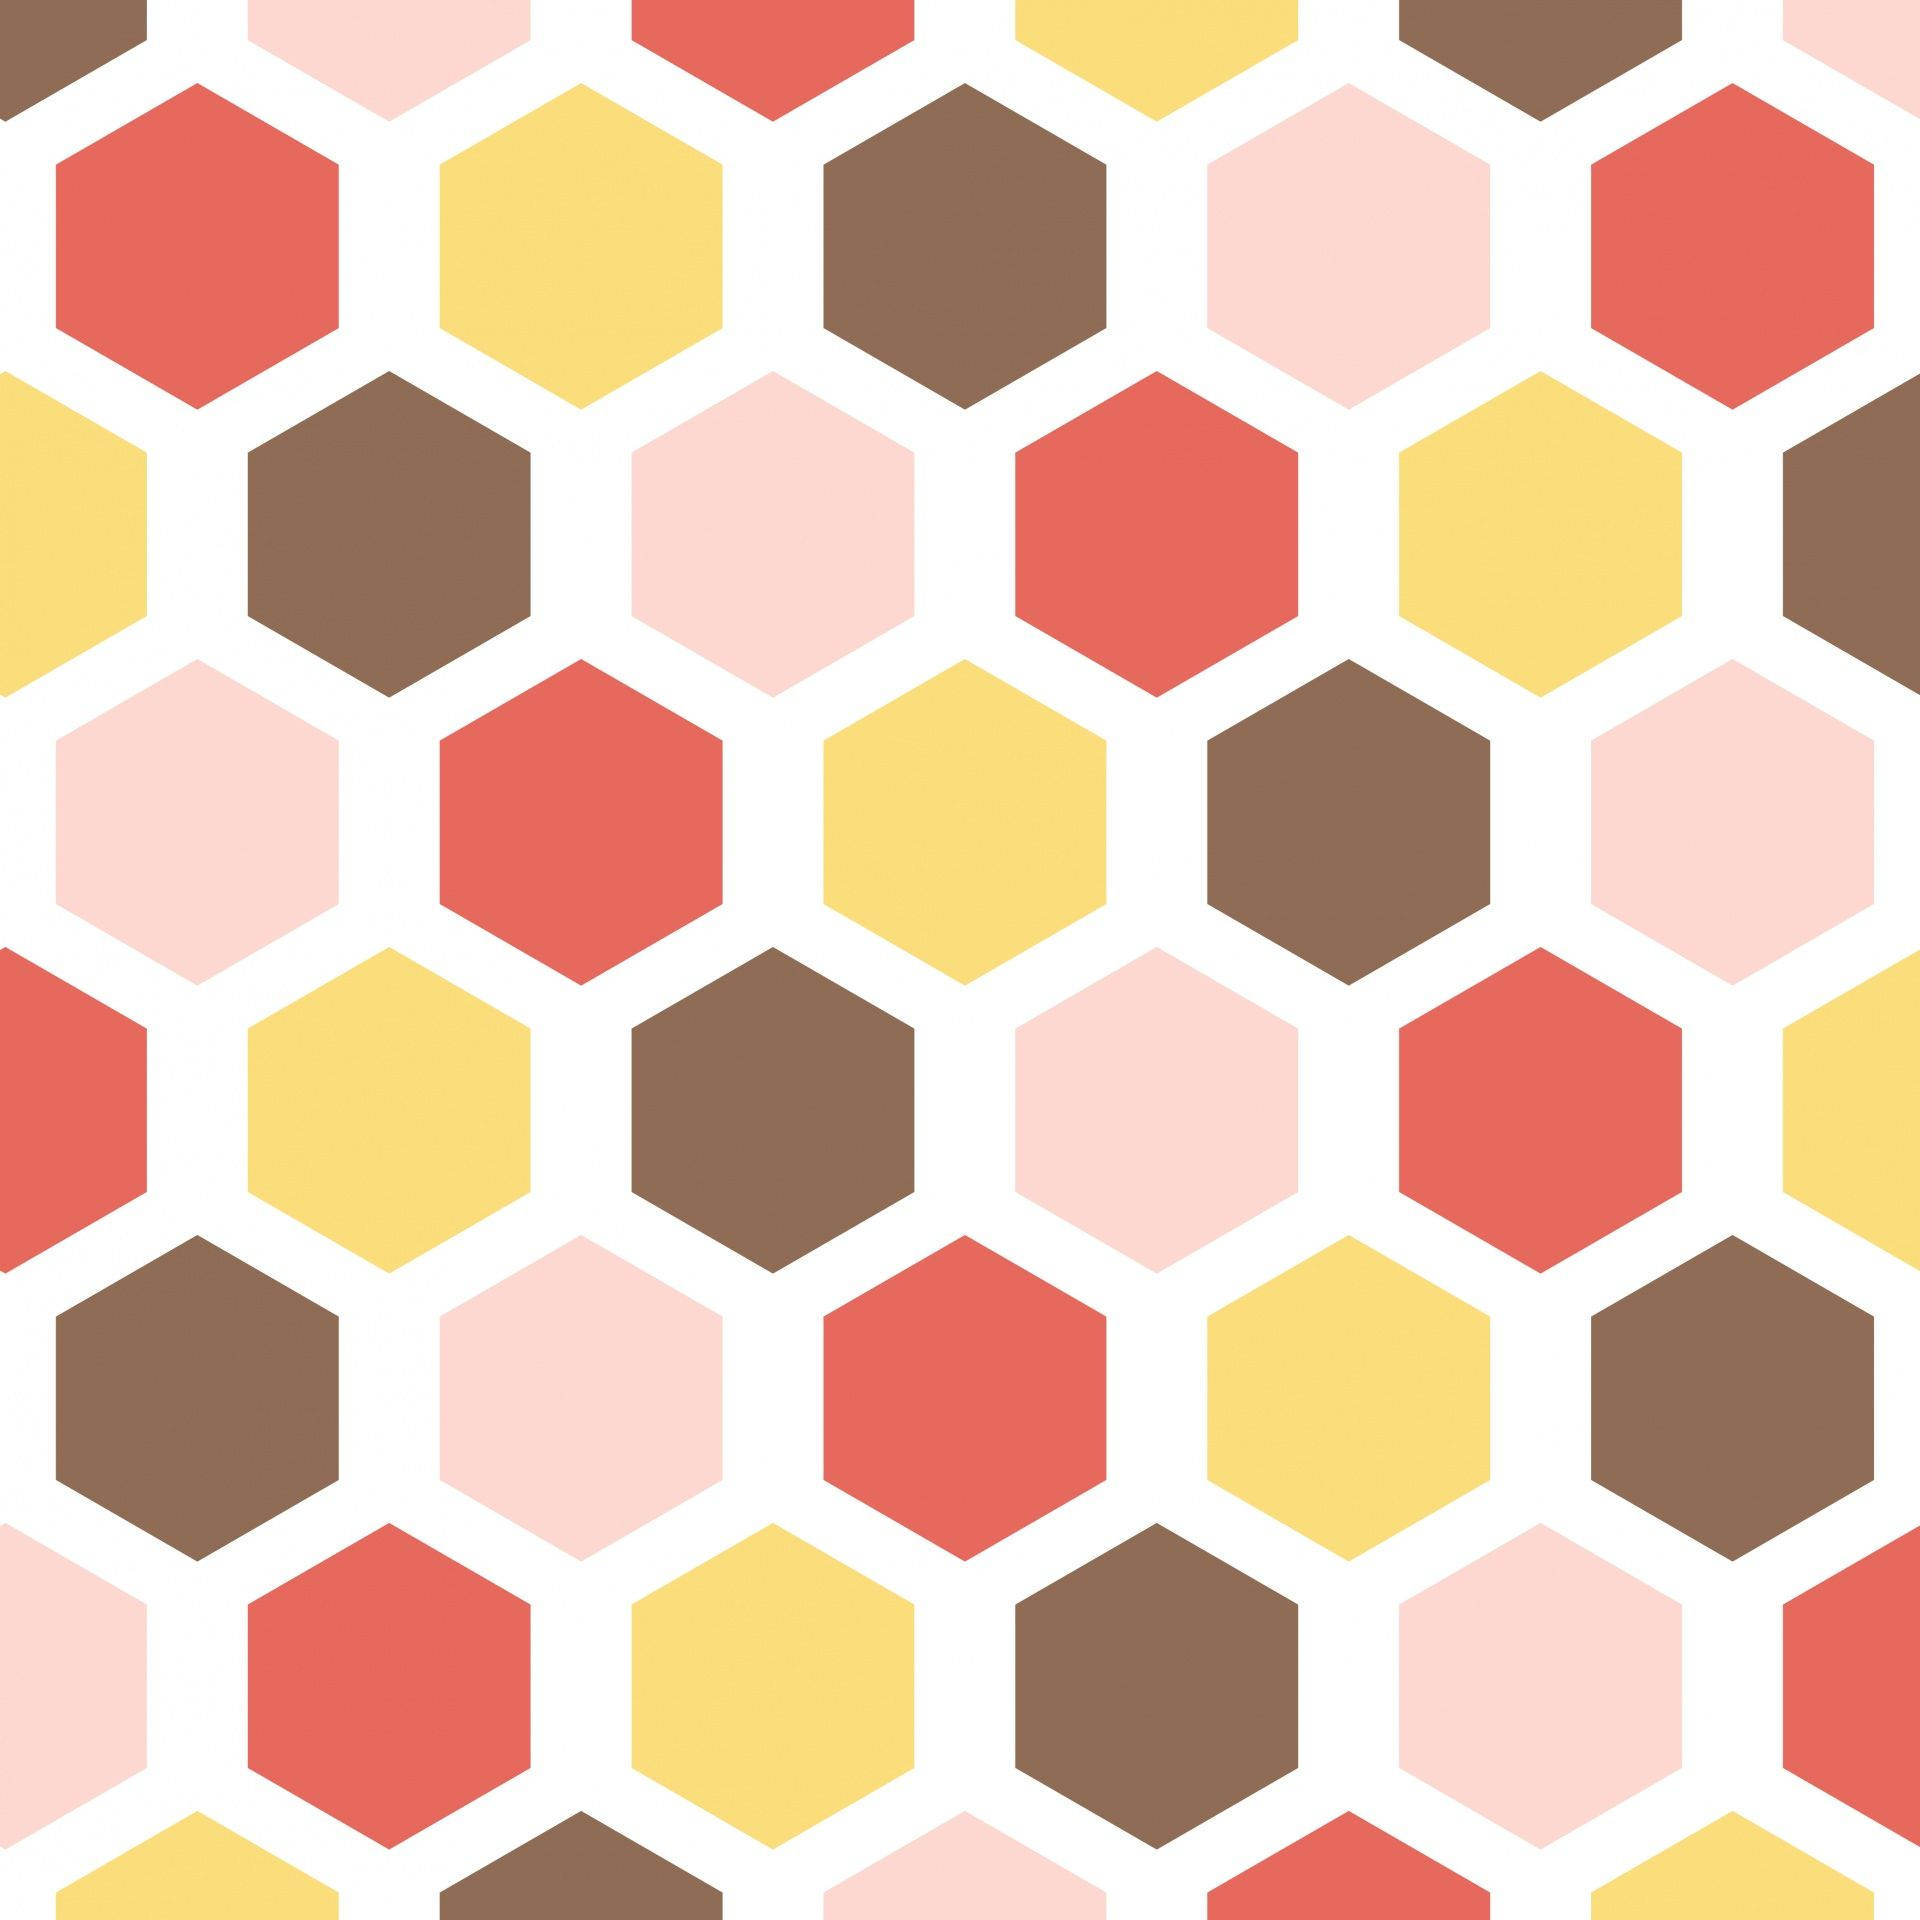 Hexagon 1920X1920 Wallpaper and Background Image